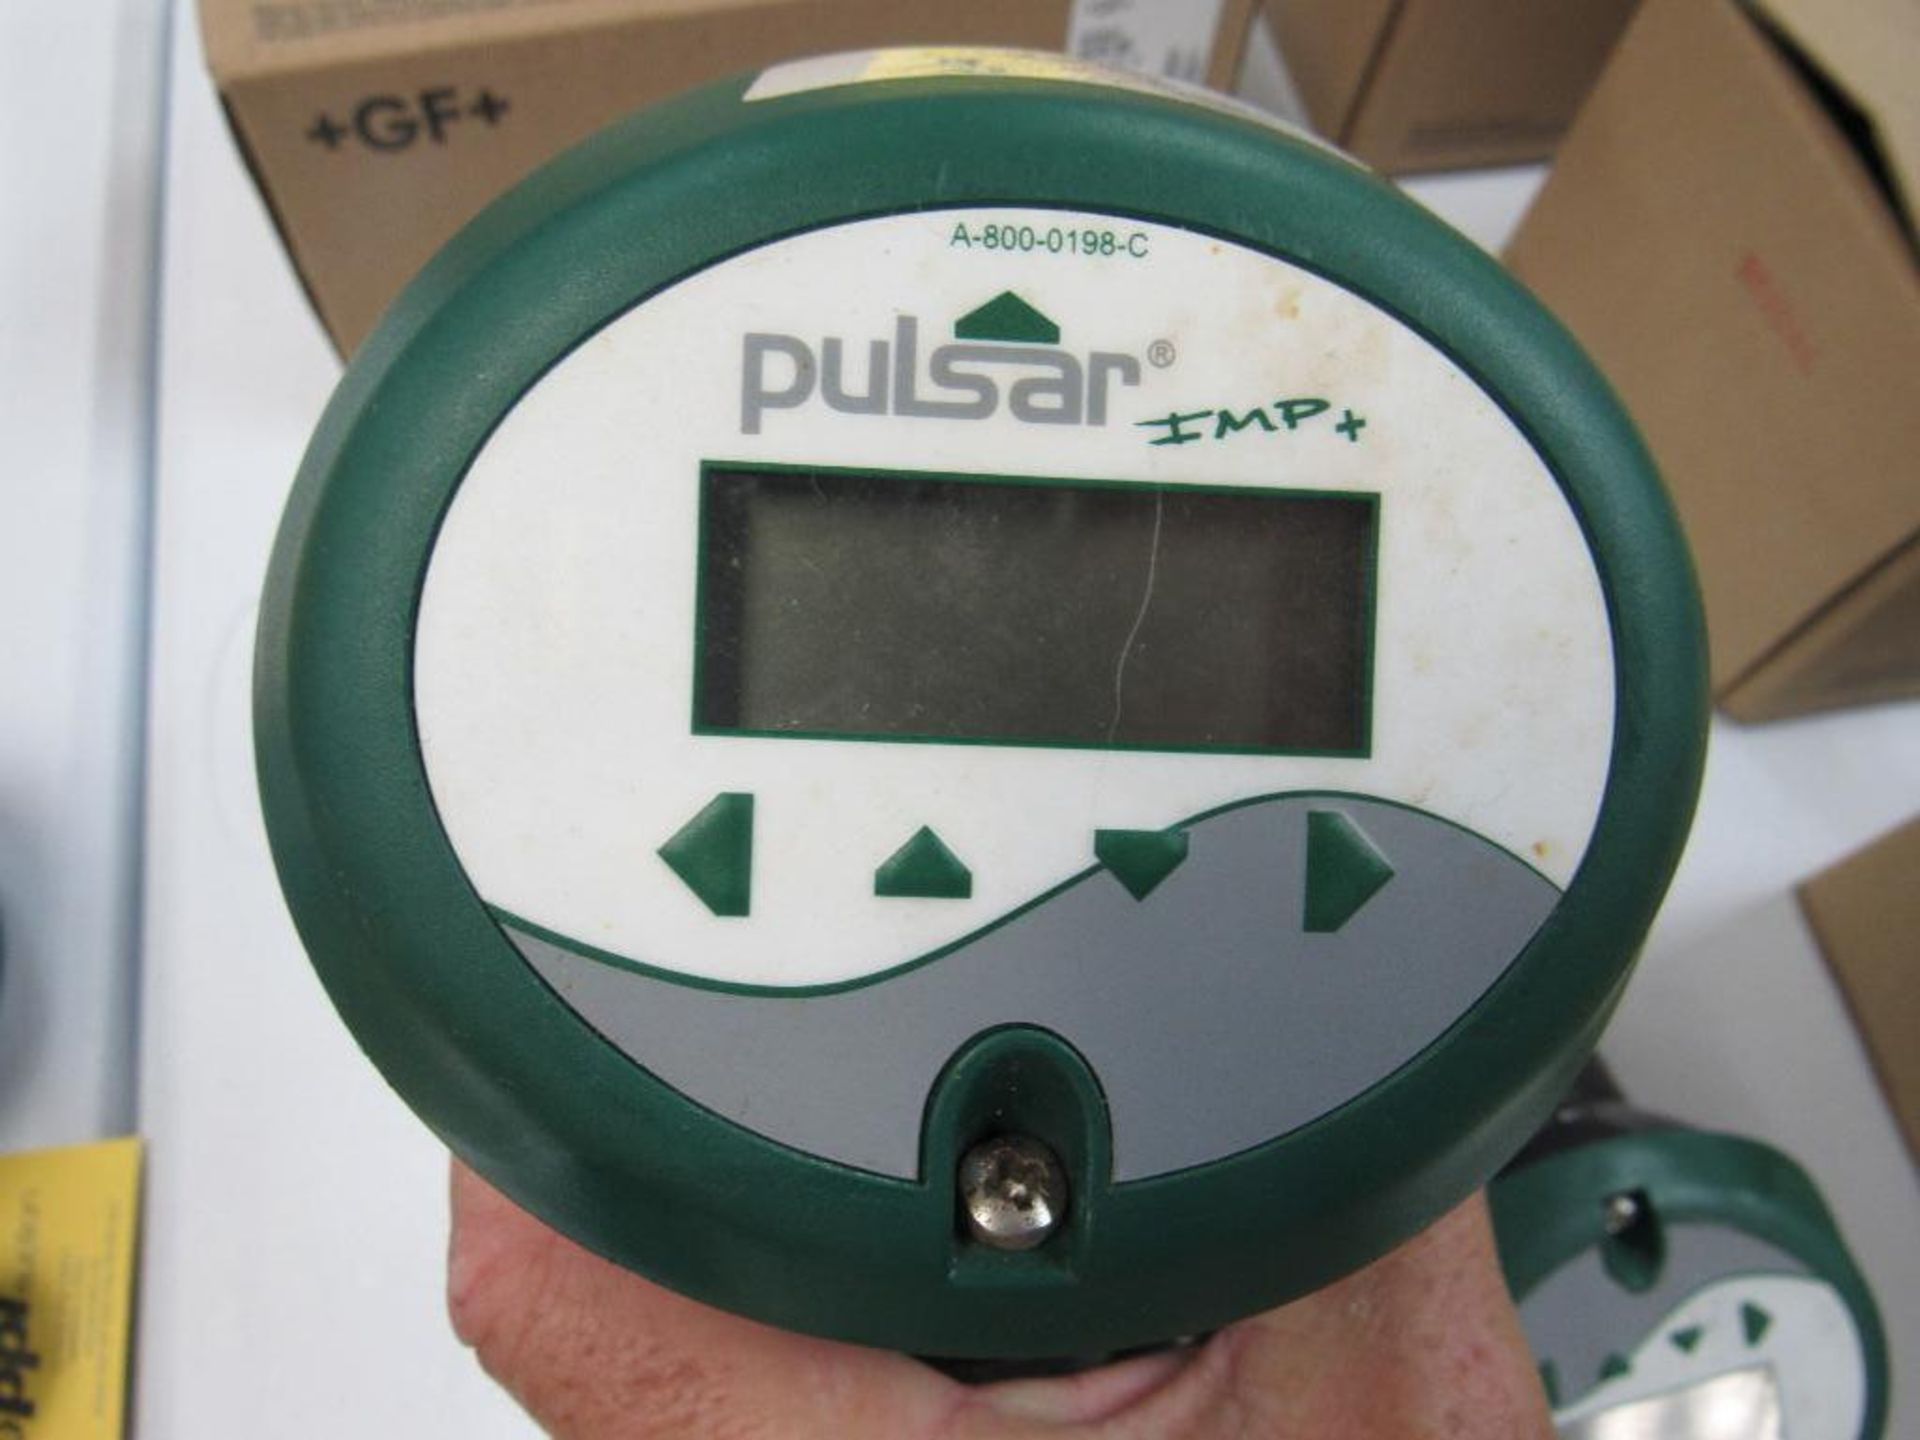 PULSAR (X3) IMP6 - Non contacting ultrasonic level measurement and digital echo processing - Image 2 of 3